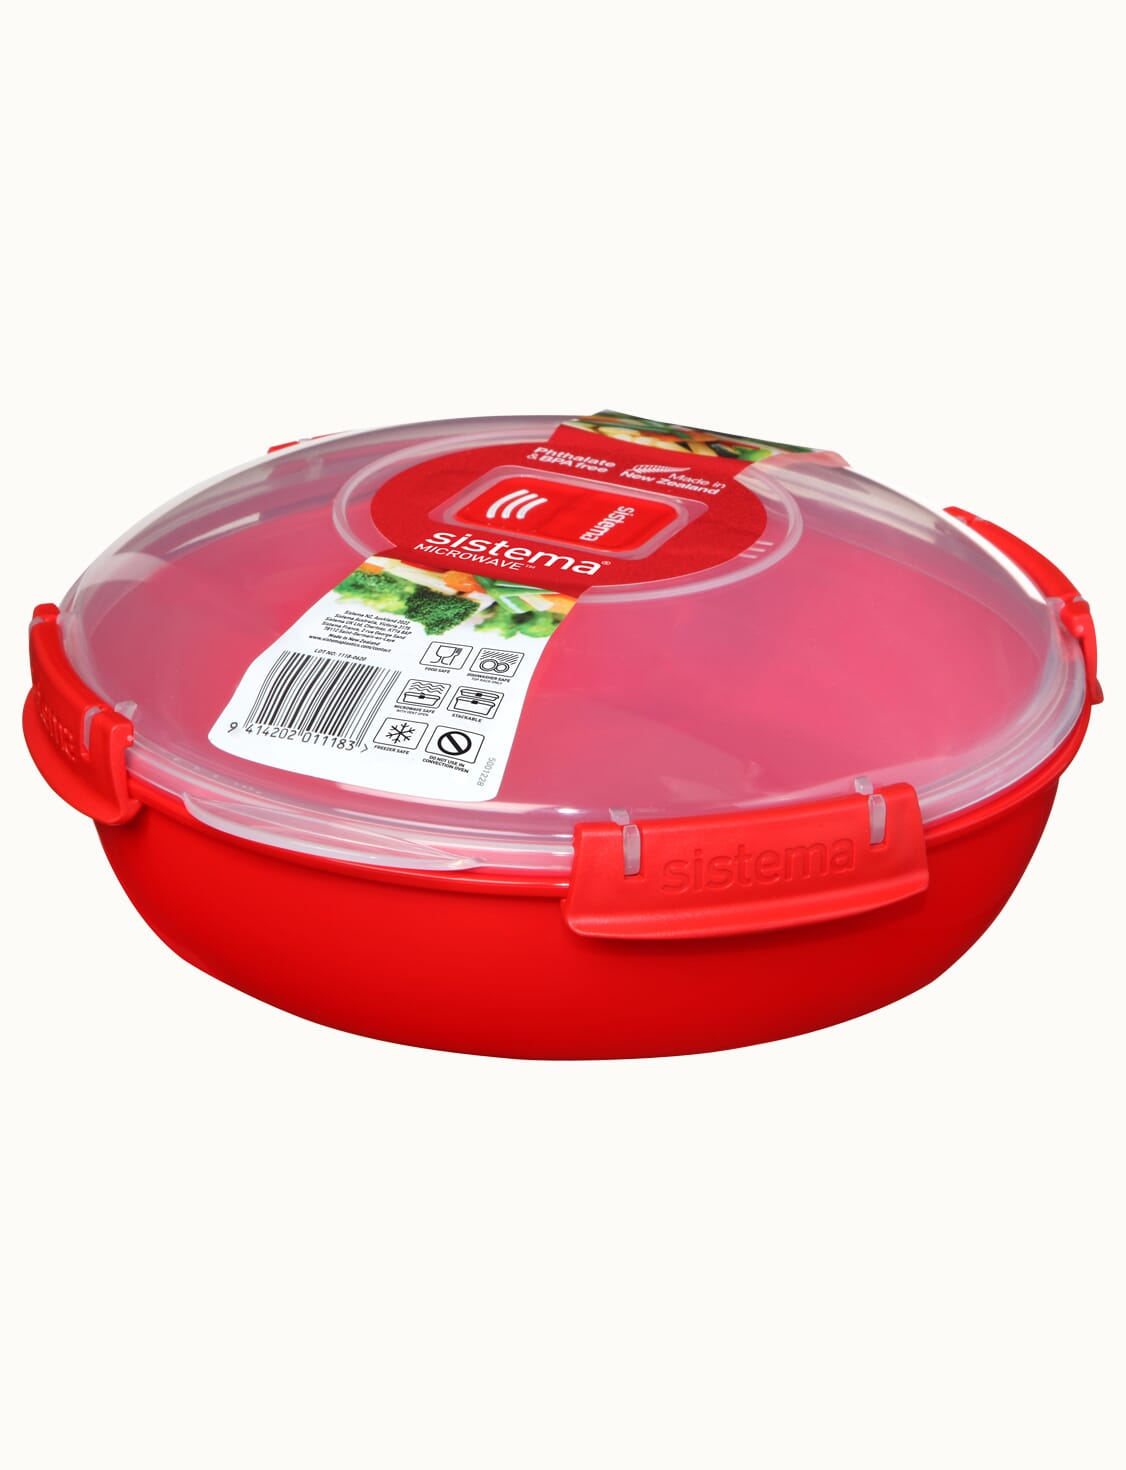 https://stergita.sirv.com/sistema/catalog/product/1/1/1118_round-plate_microwave_vent.png?canvas.color=fcfbf8